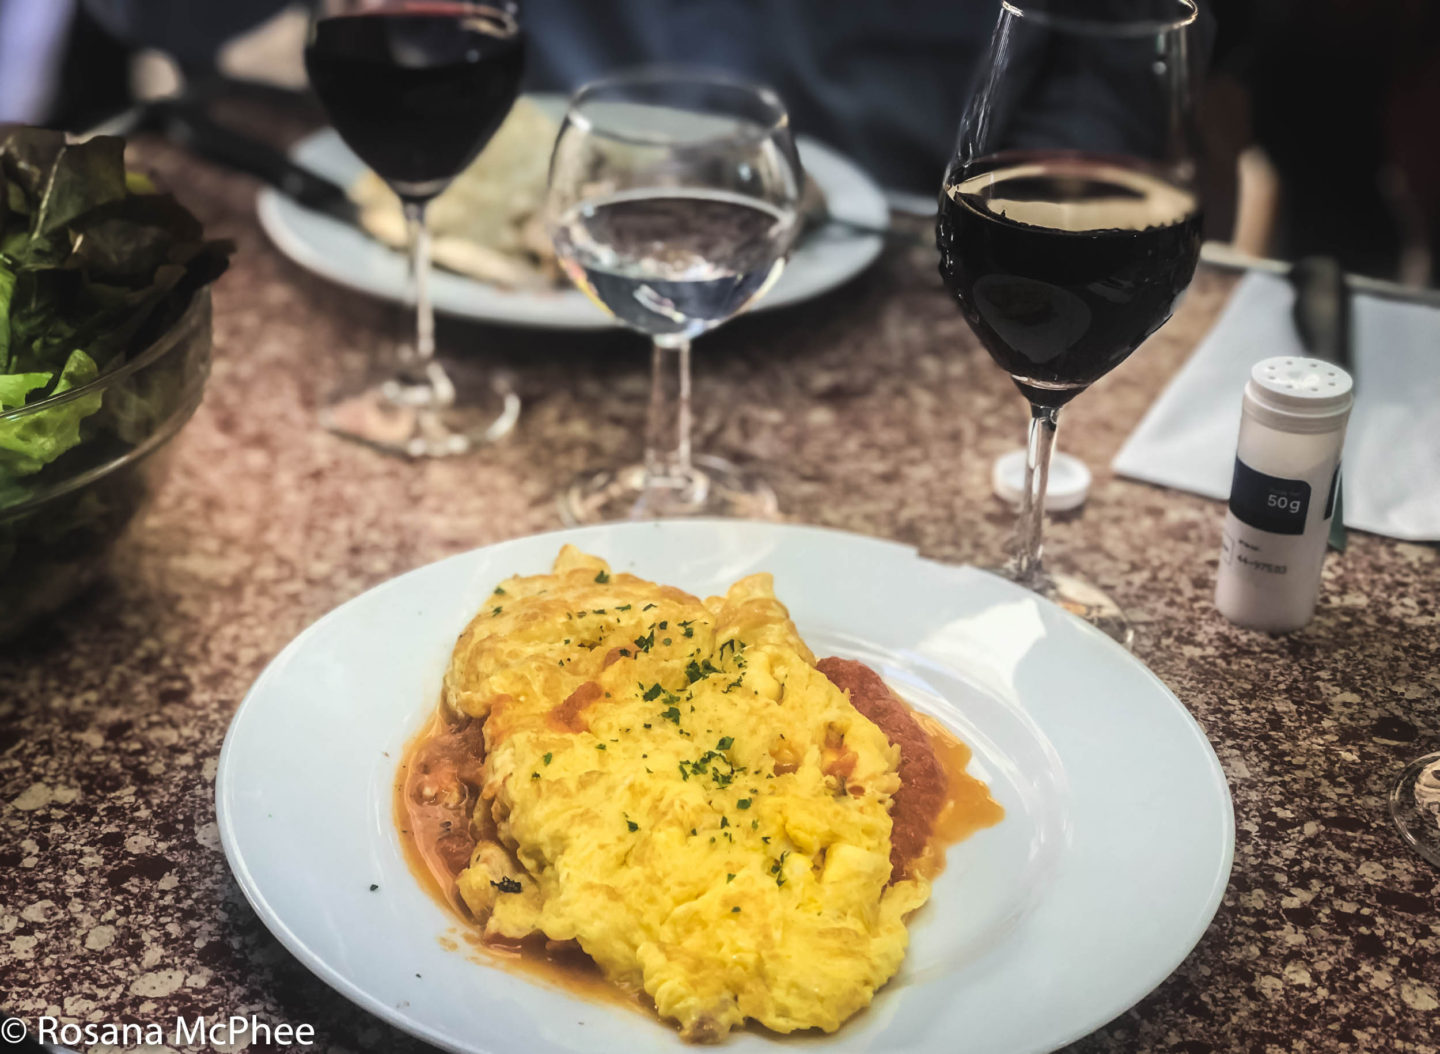 omelette with piperade – a traditional Basque sauce spending day in Bayonne